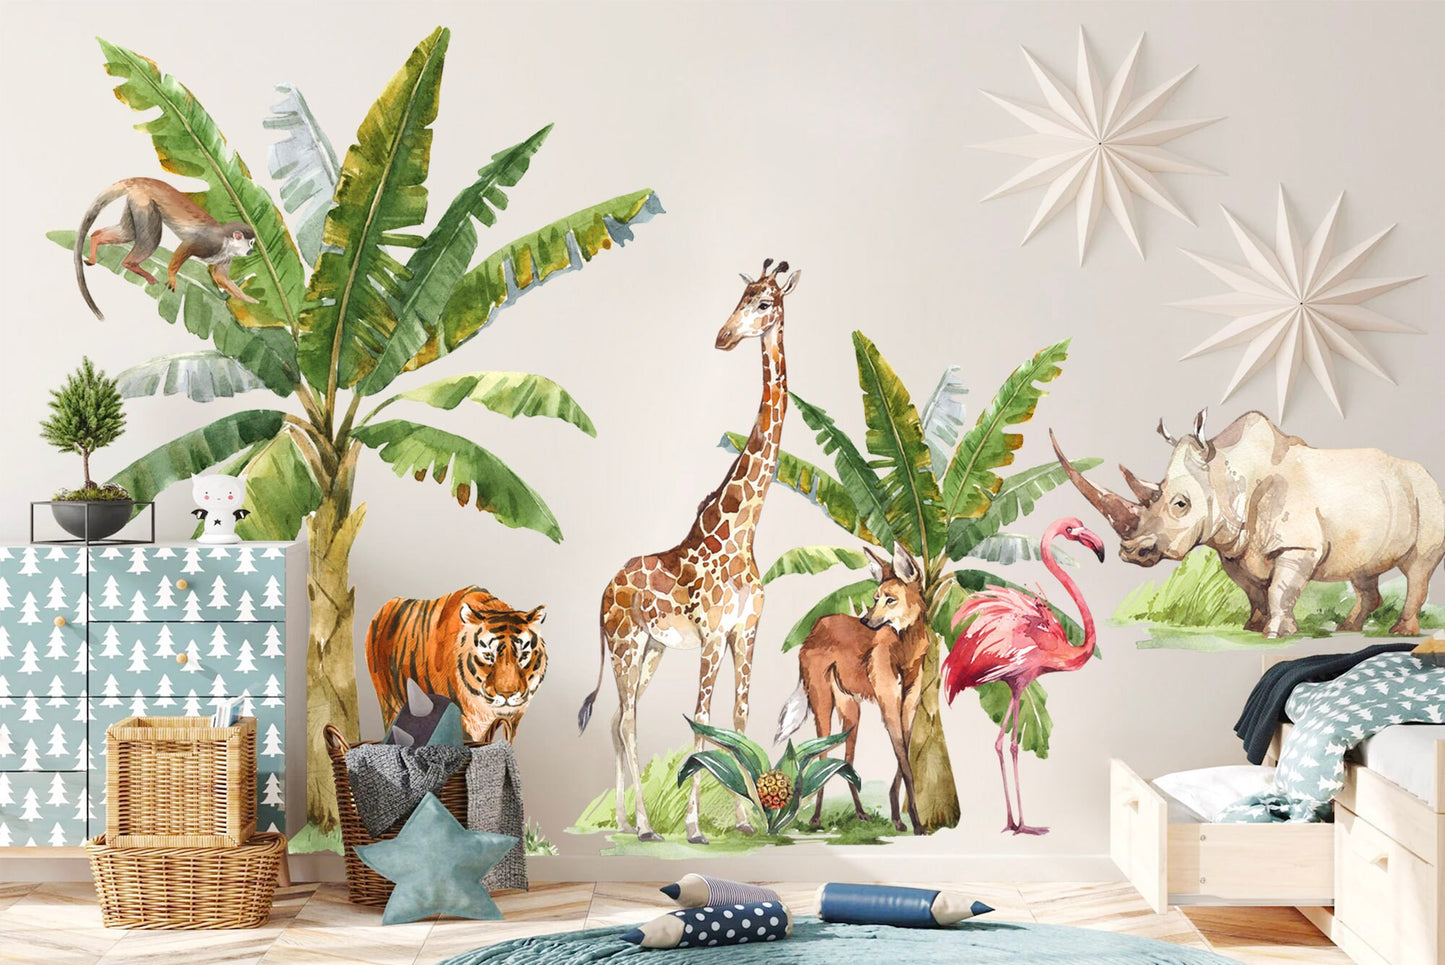 Jungle Animal Party Wall Decals - Cheerful Watercolor Style for Kids Room Decor - BR217